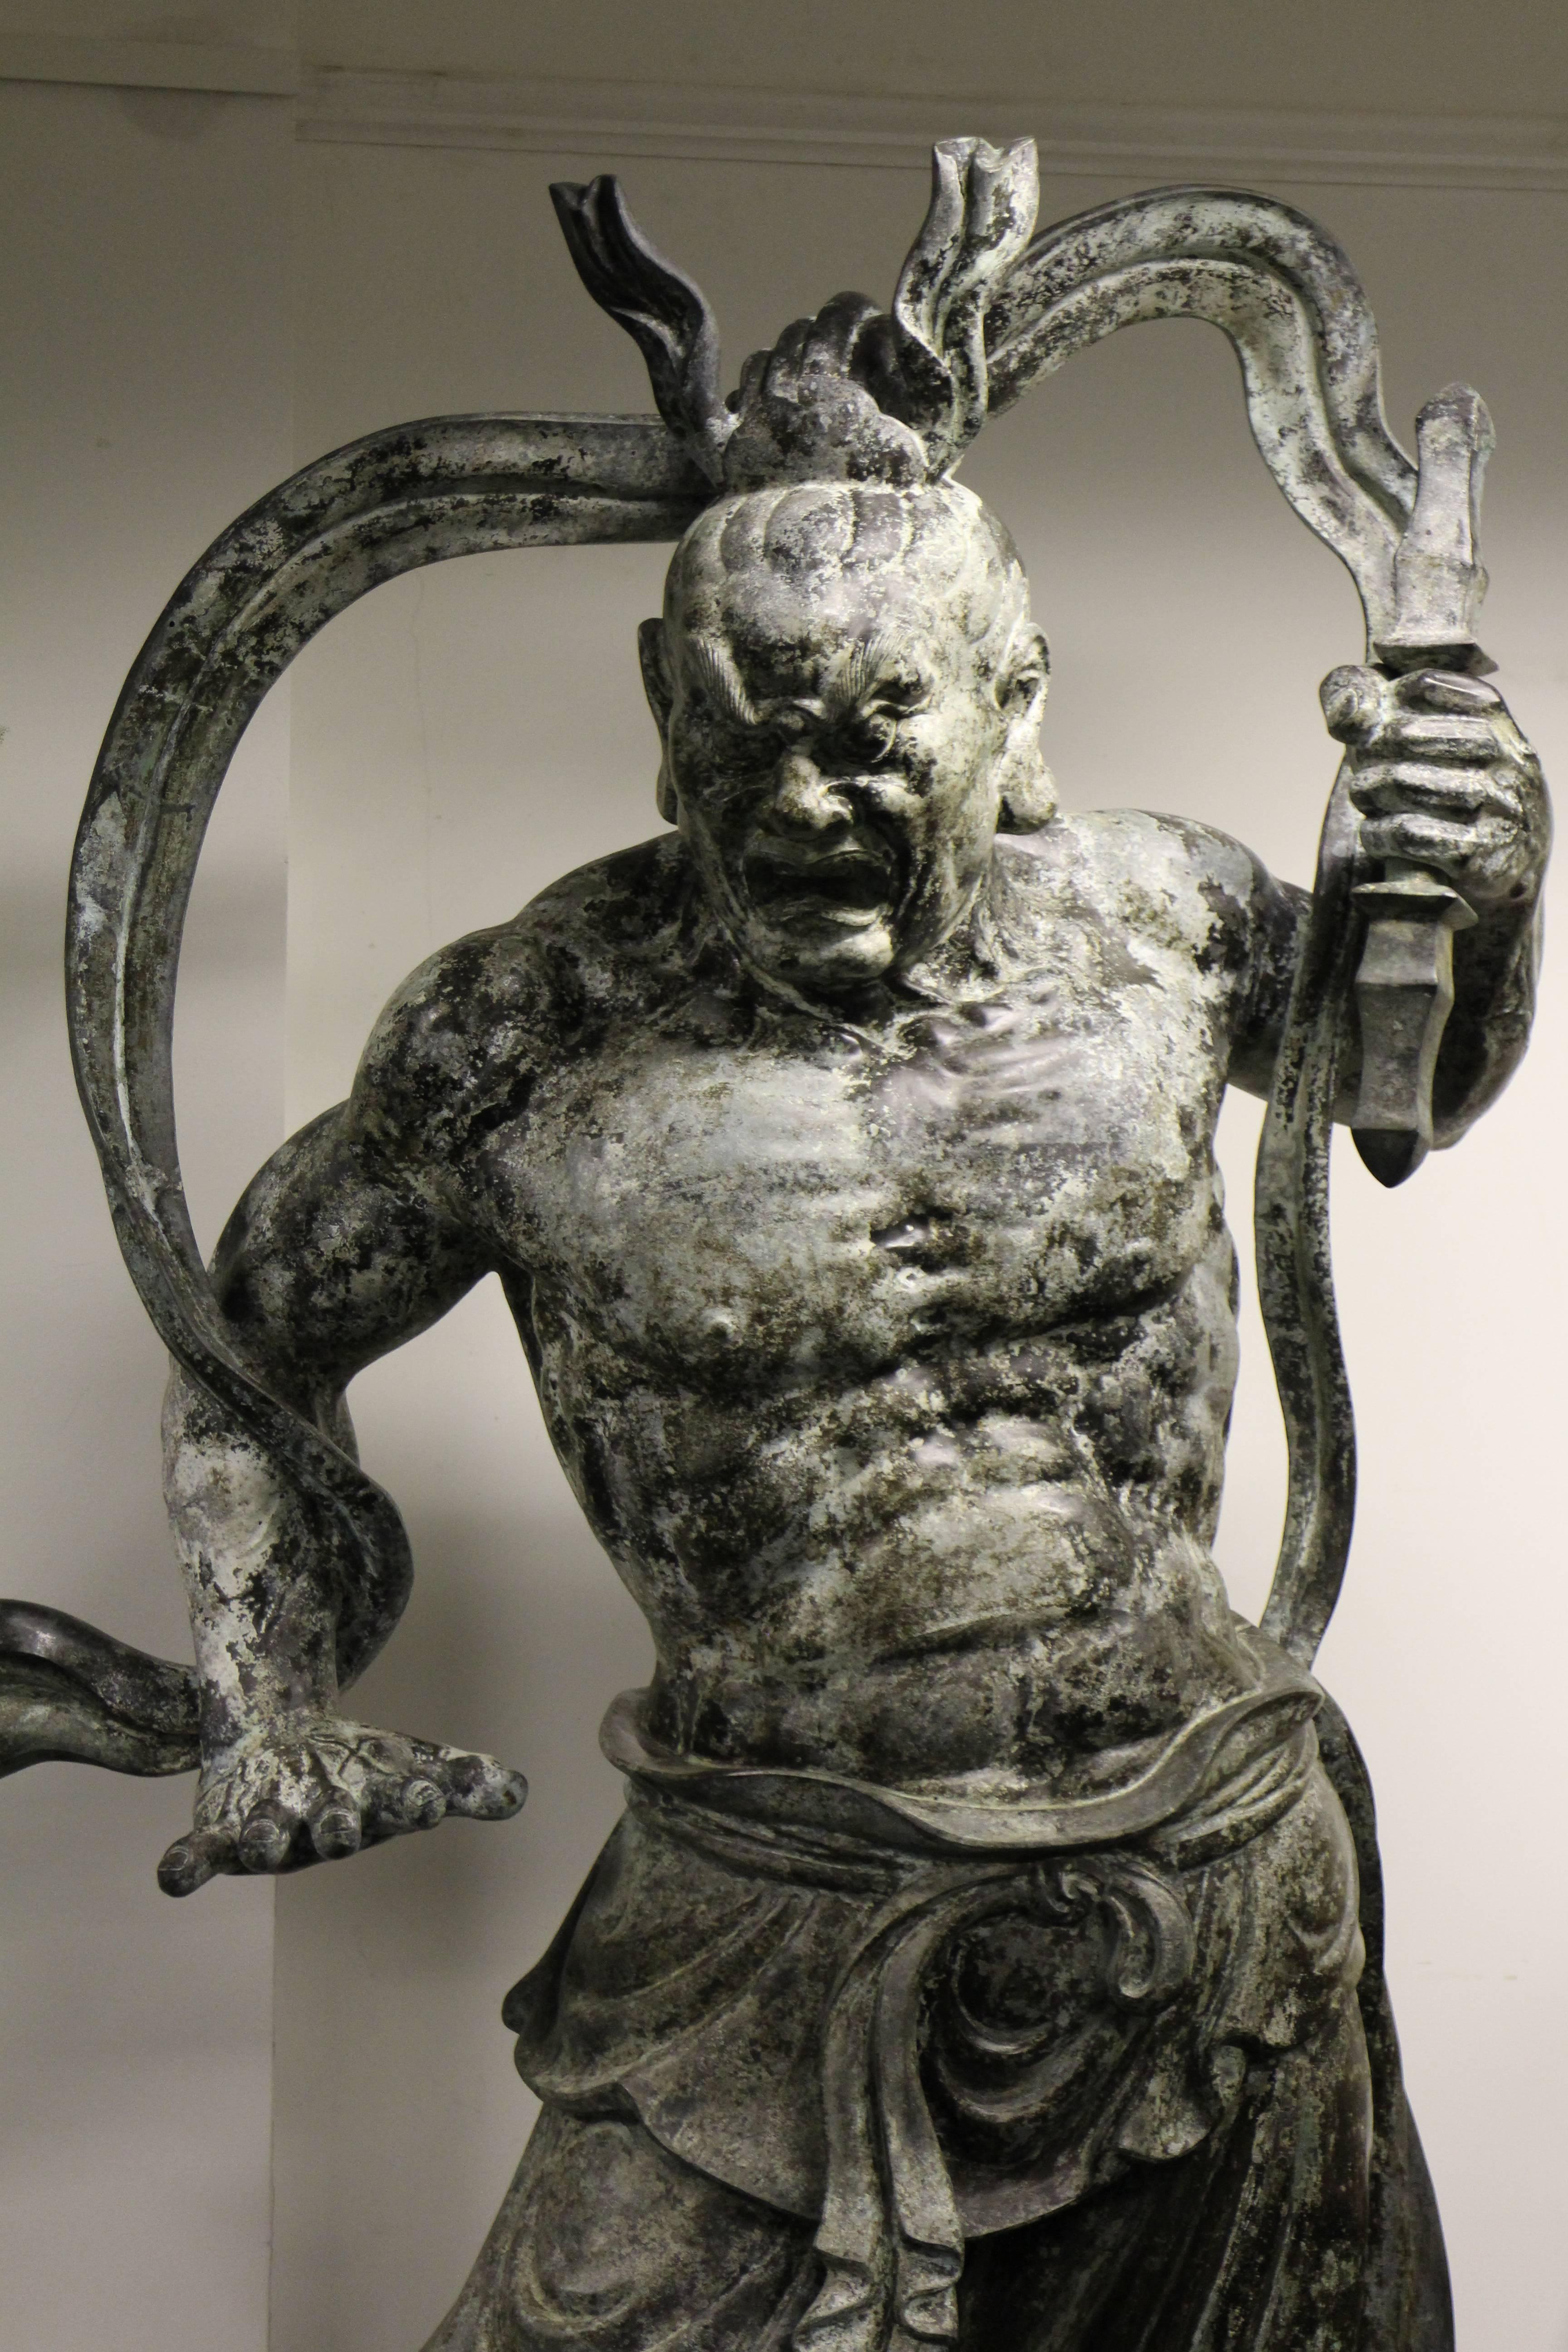 An impressive monumental pair of Japanese bronze Nio (guardian of the Buddha), the Nio are well cast and have imposing facial expressions. The left one holds a club and extends his hand denying entry, the other holds a pointed implement, his mouth